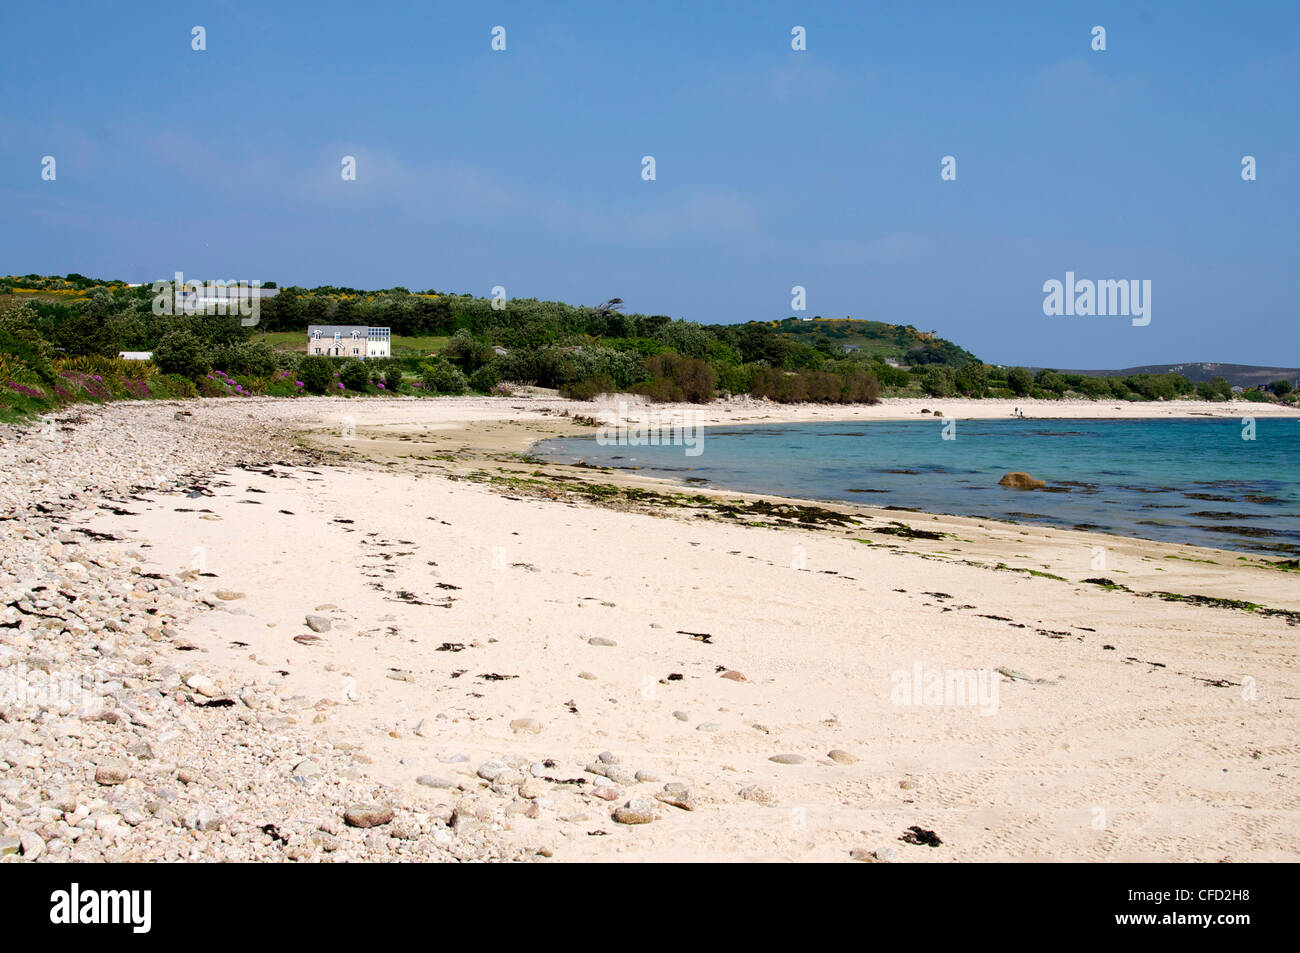 Green Bay, Bryher, Isles of Scilly, United Kingdom, Europe Stock Photo